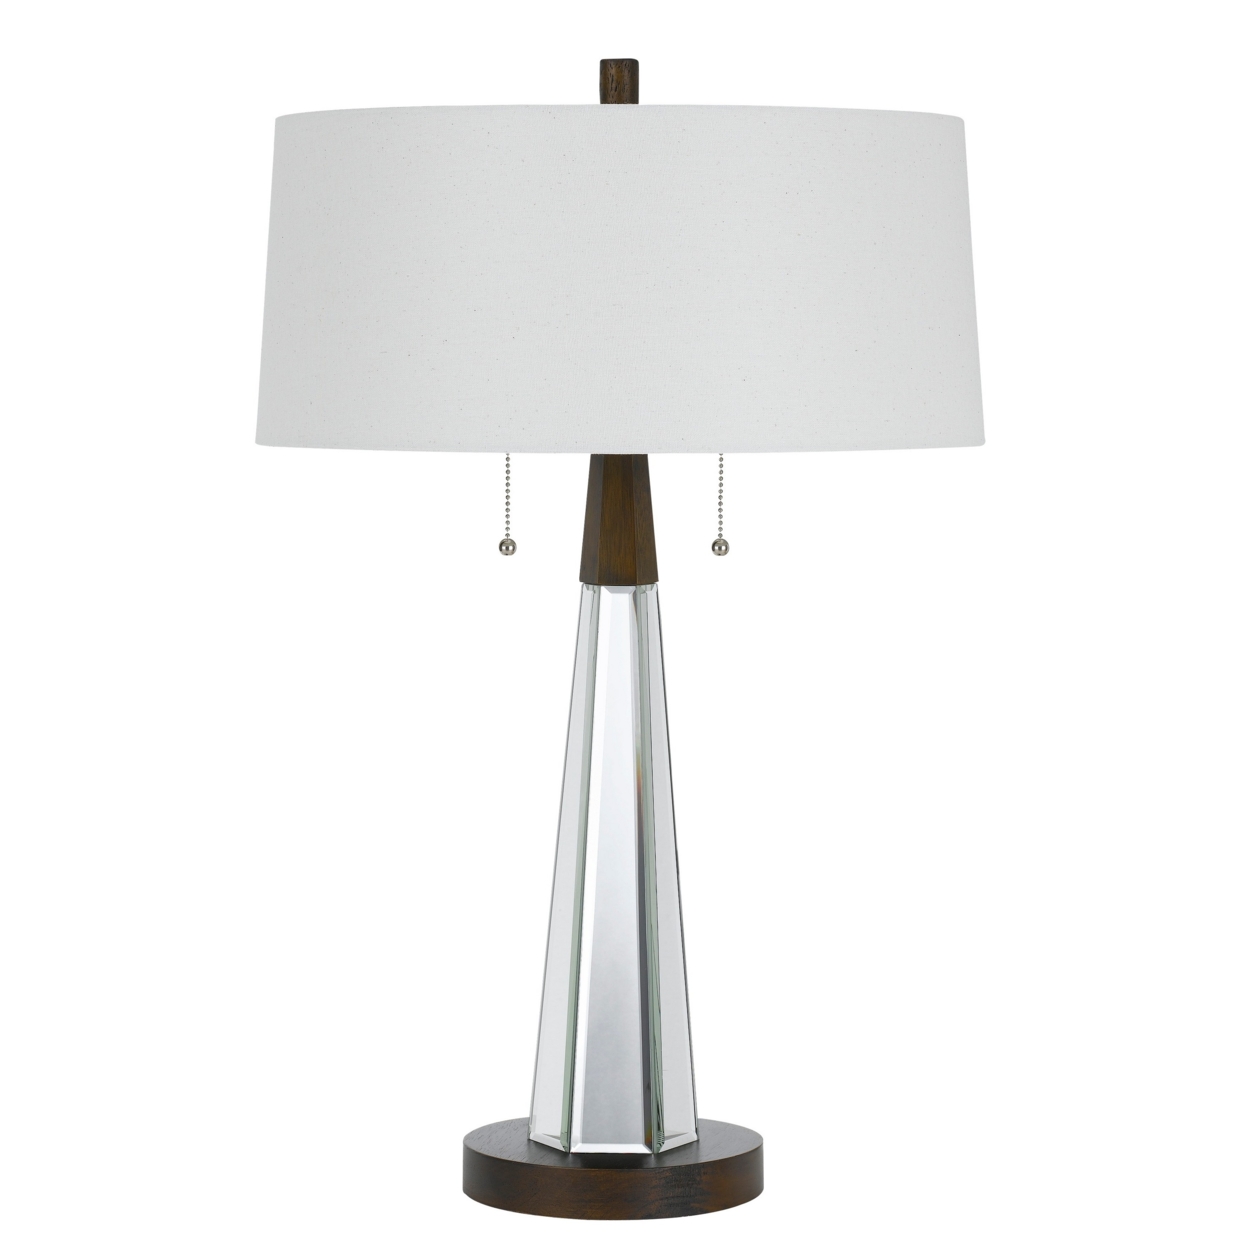 Fabric Shade Table Lamp With Faceted Mirror And Wooden Base, White- Saltoro Sherpi